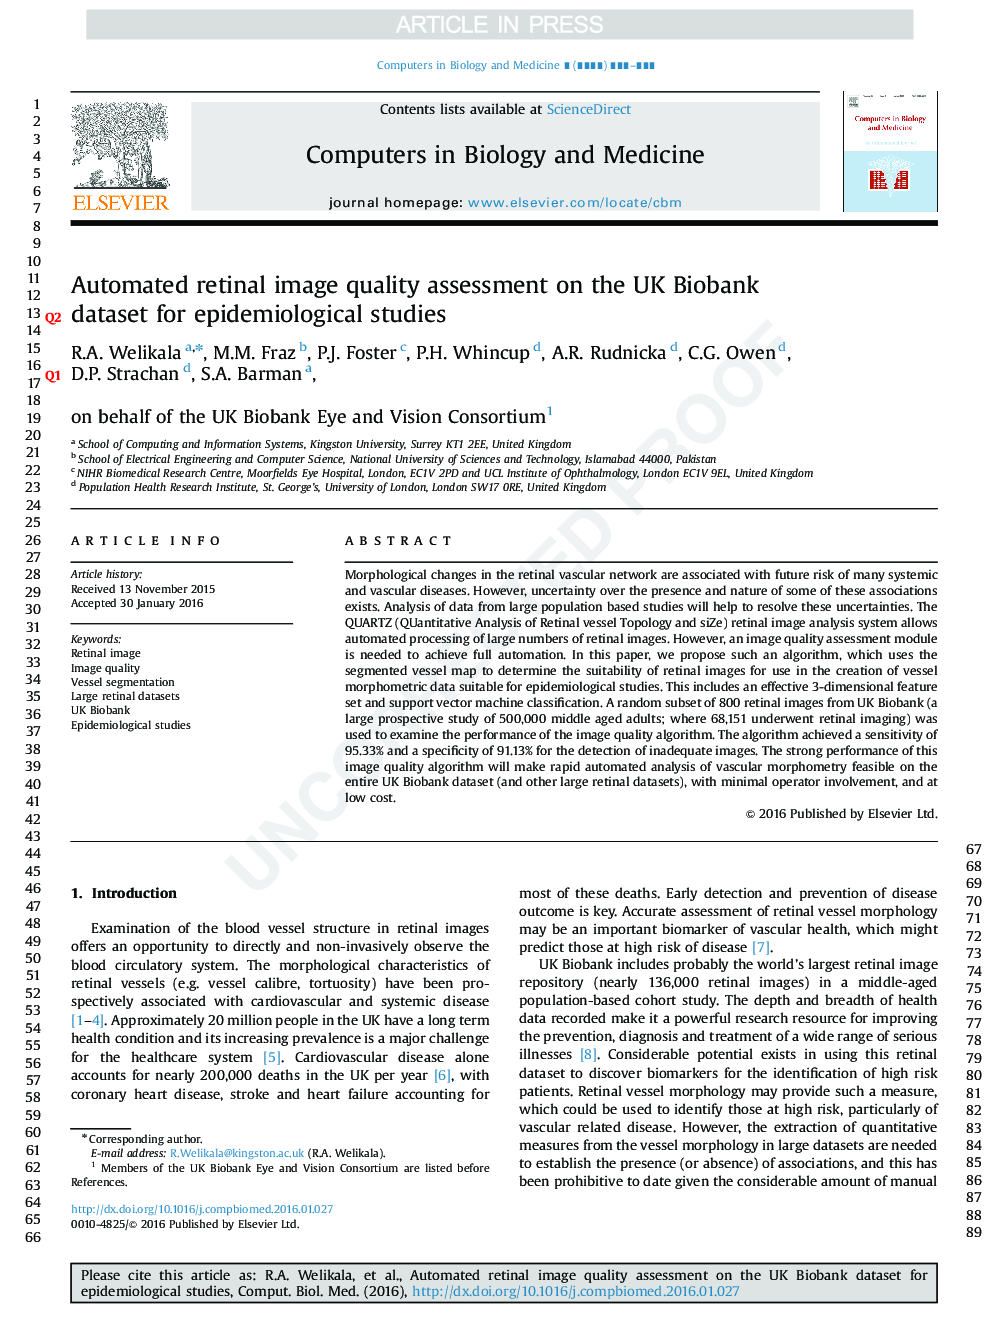 Automated retinal image quality assessment on the UK Biobank dataset for epidemiological studies